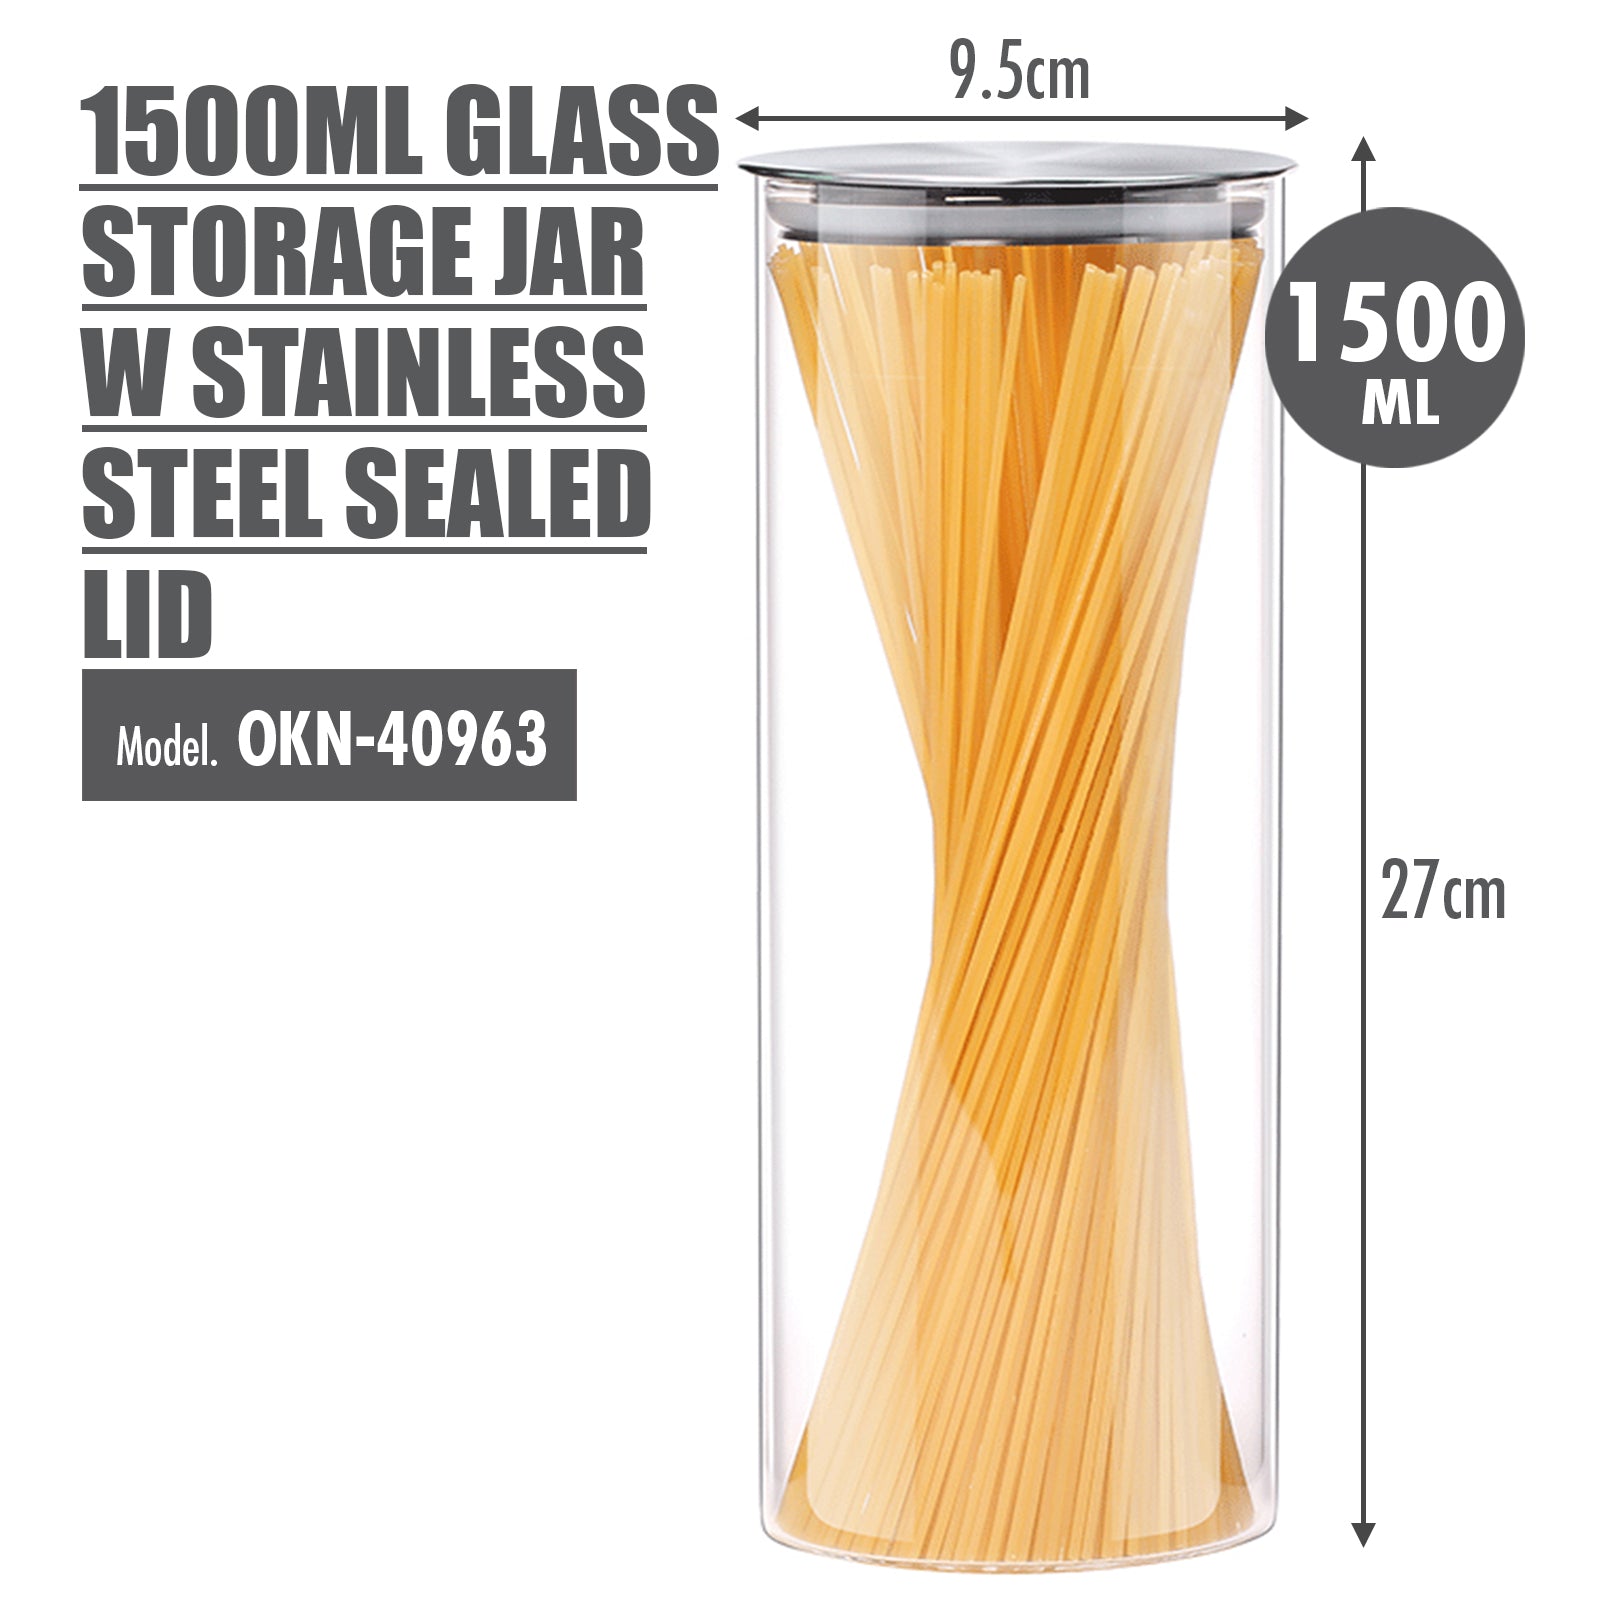 1500ml Glass Storage Jar with Stainless Steel Sealed Lid (Dia: 9.5cm) - HOUZE - The Homeware Superstore